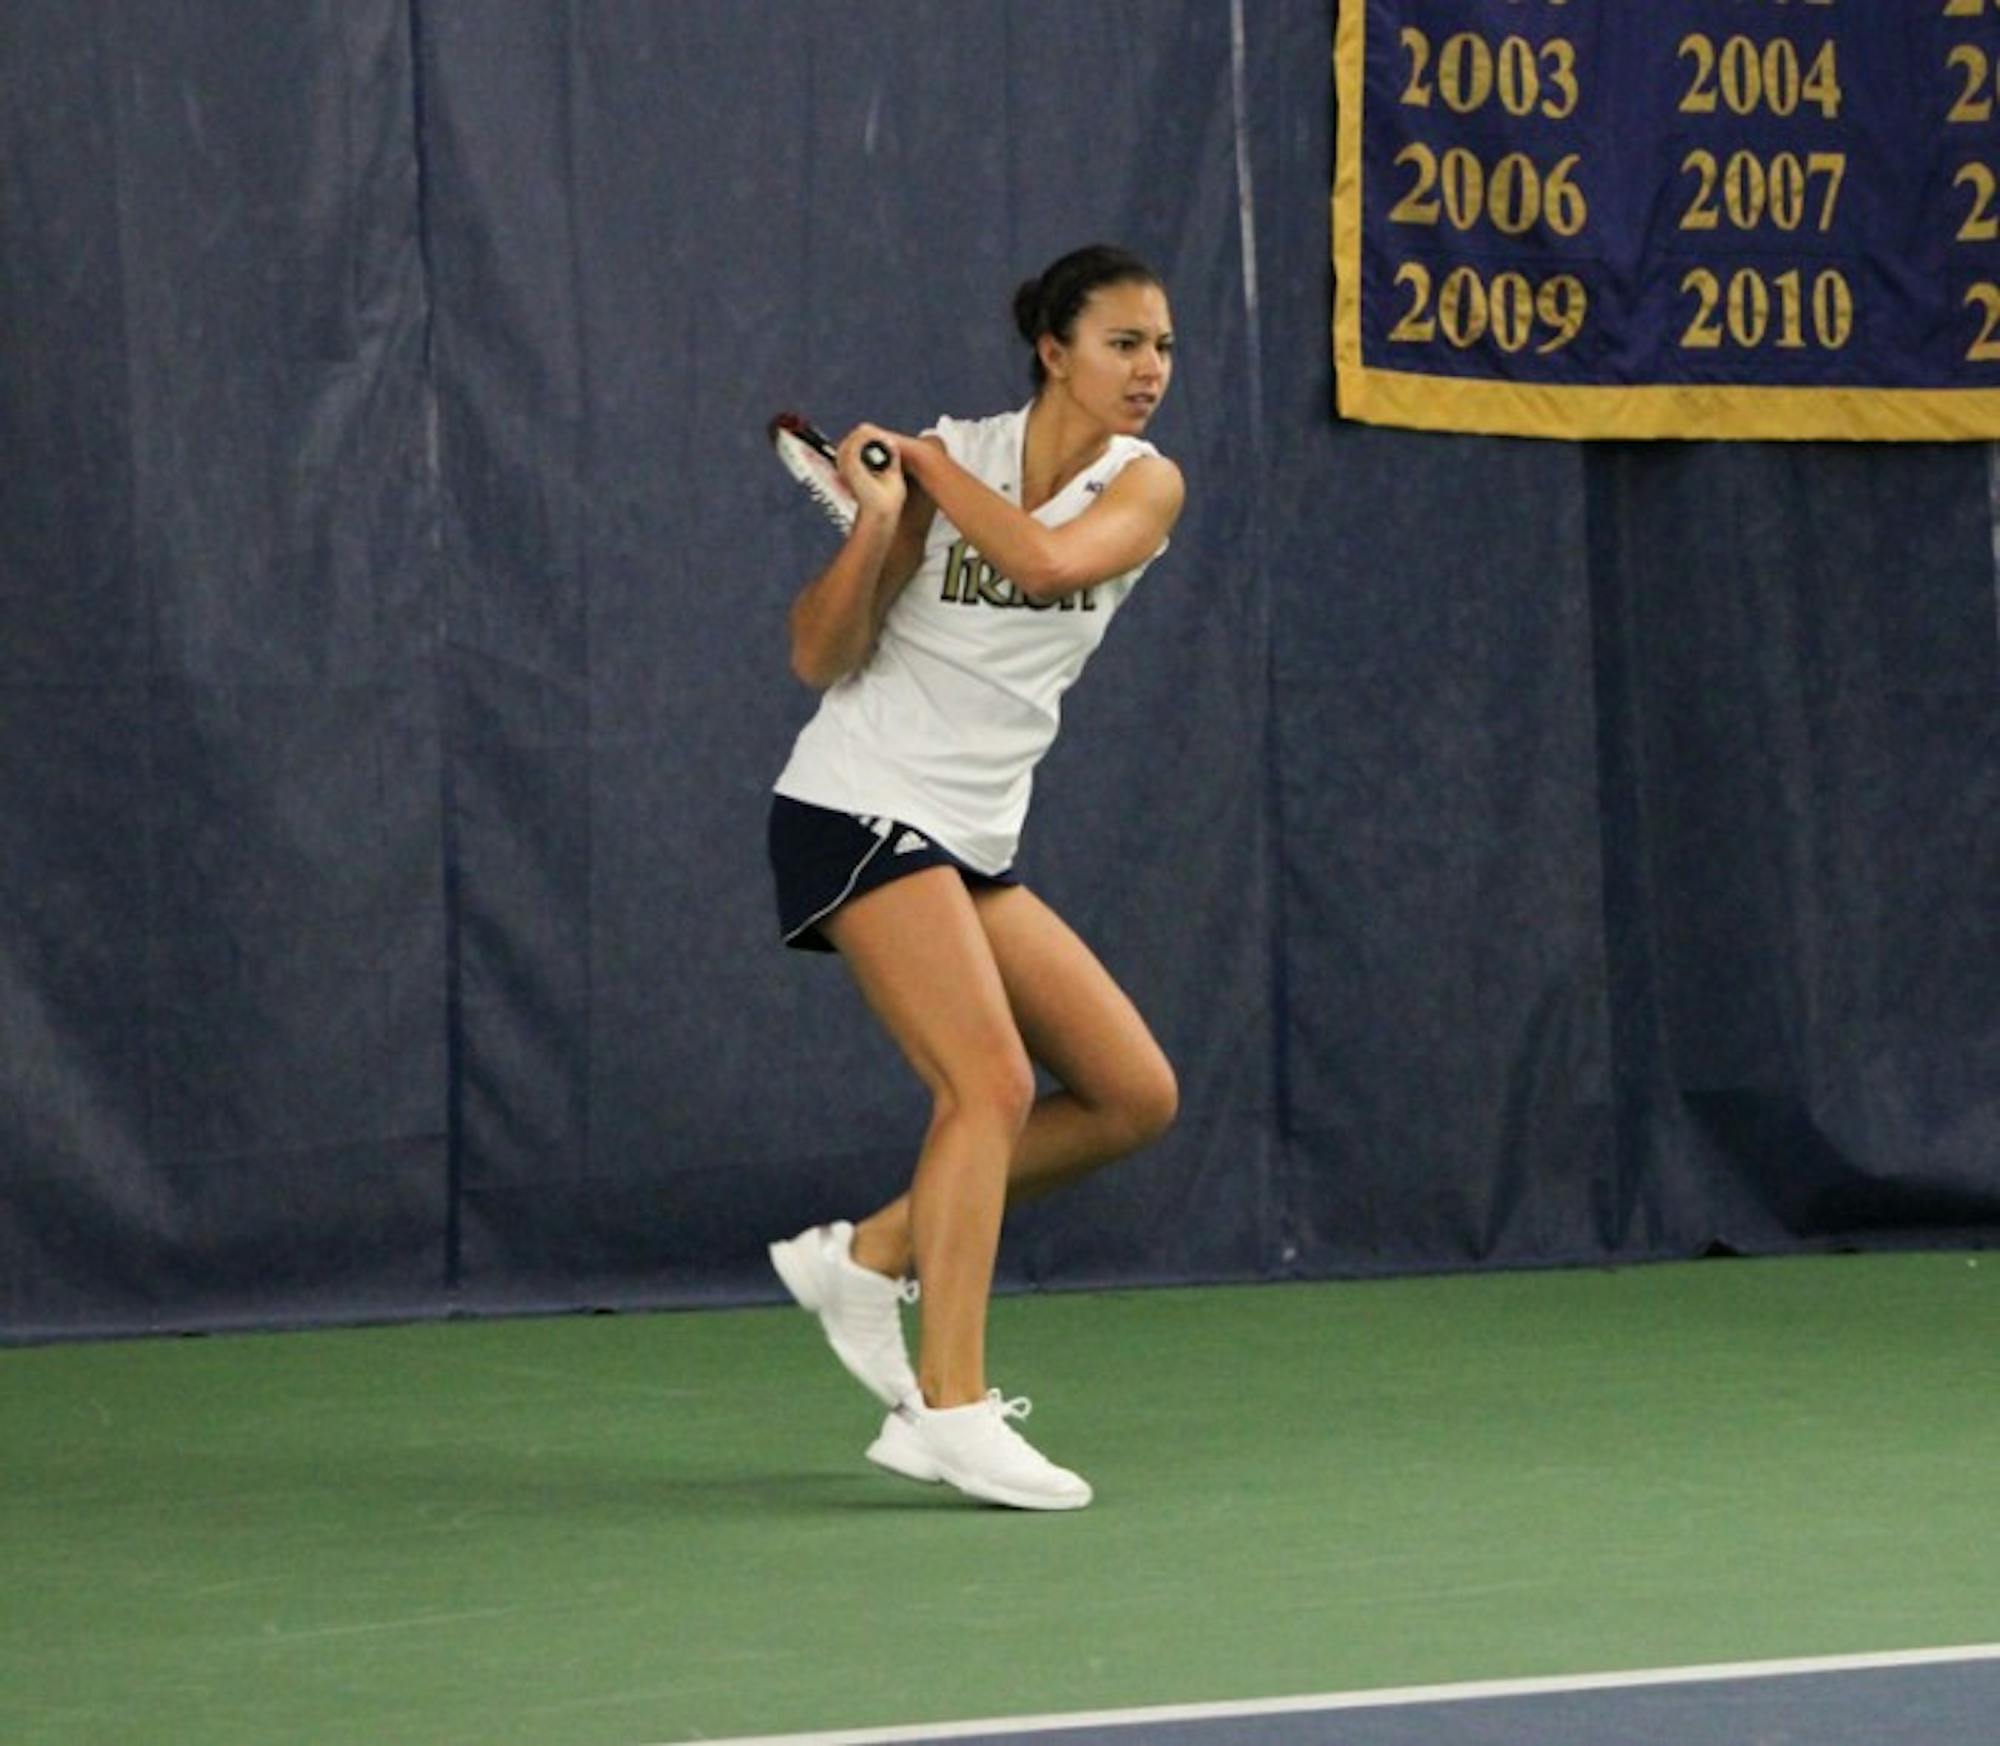 Senior Britney Sanders follows through her backhand in a match against Indiana on Sunday. The Irish defeated the Hoosiers 4-3.